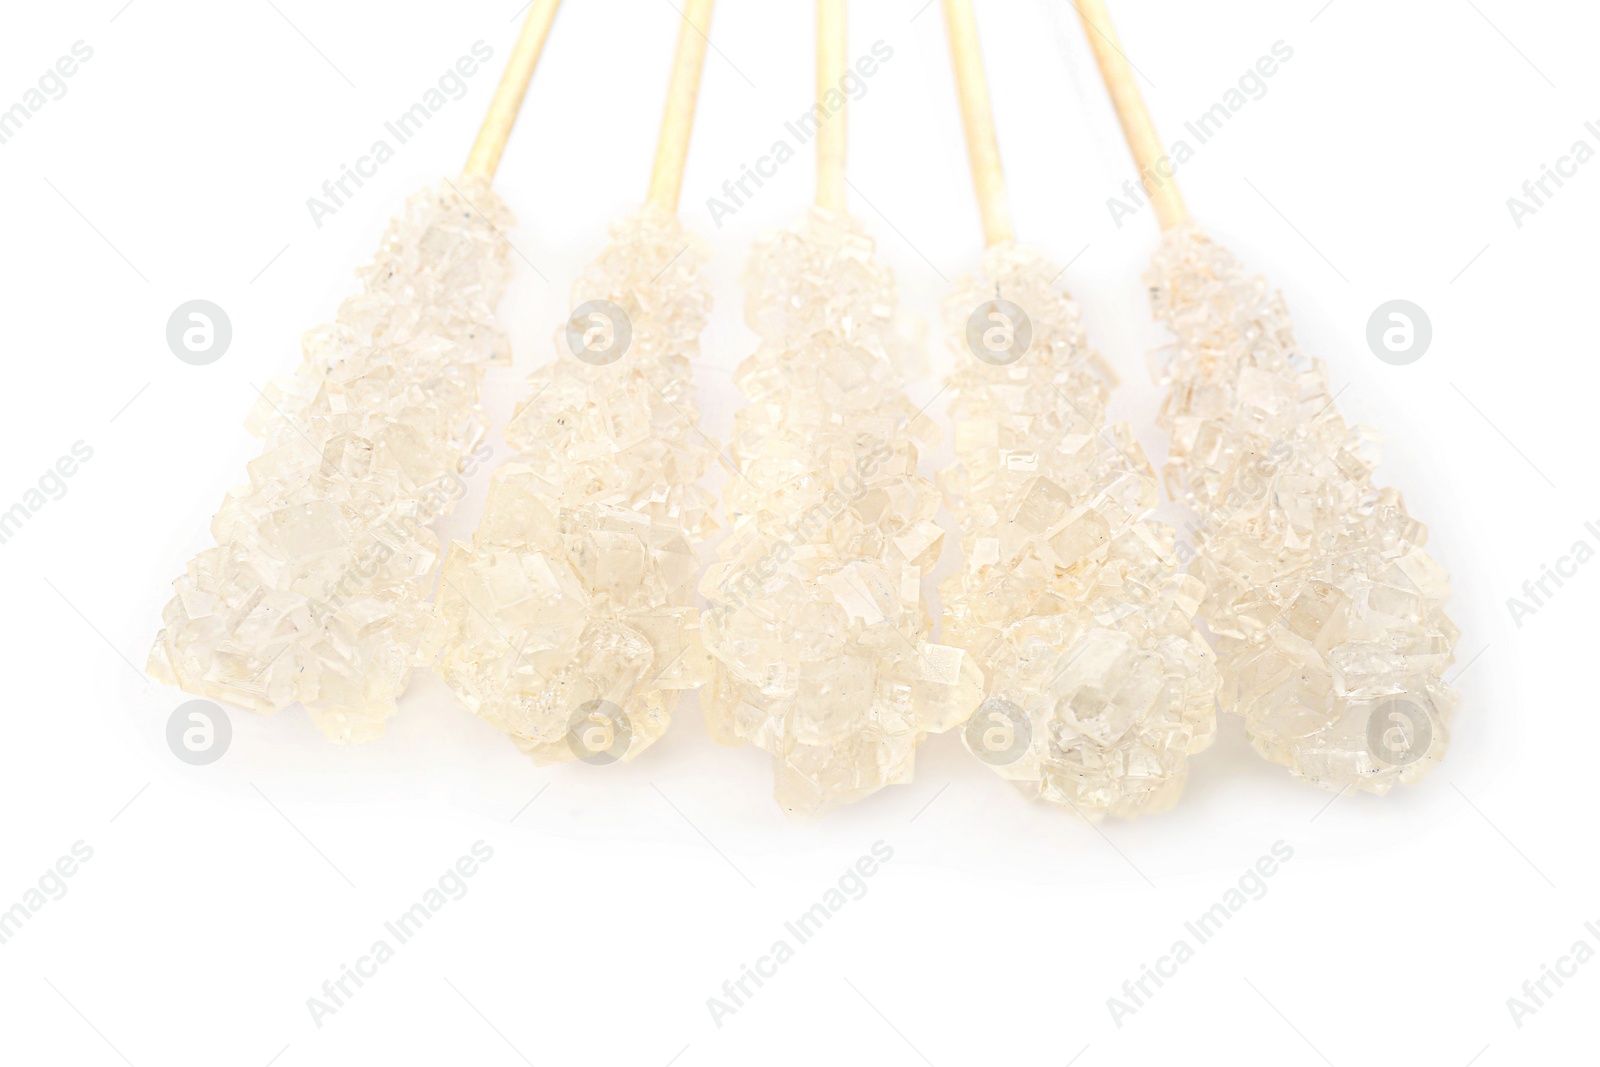 Photo of Wooden sticks with sugar crystals isolated on white, closeup. Tasty rock candies